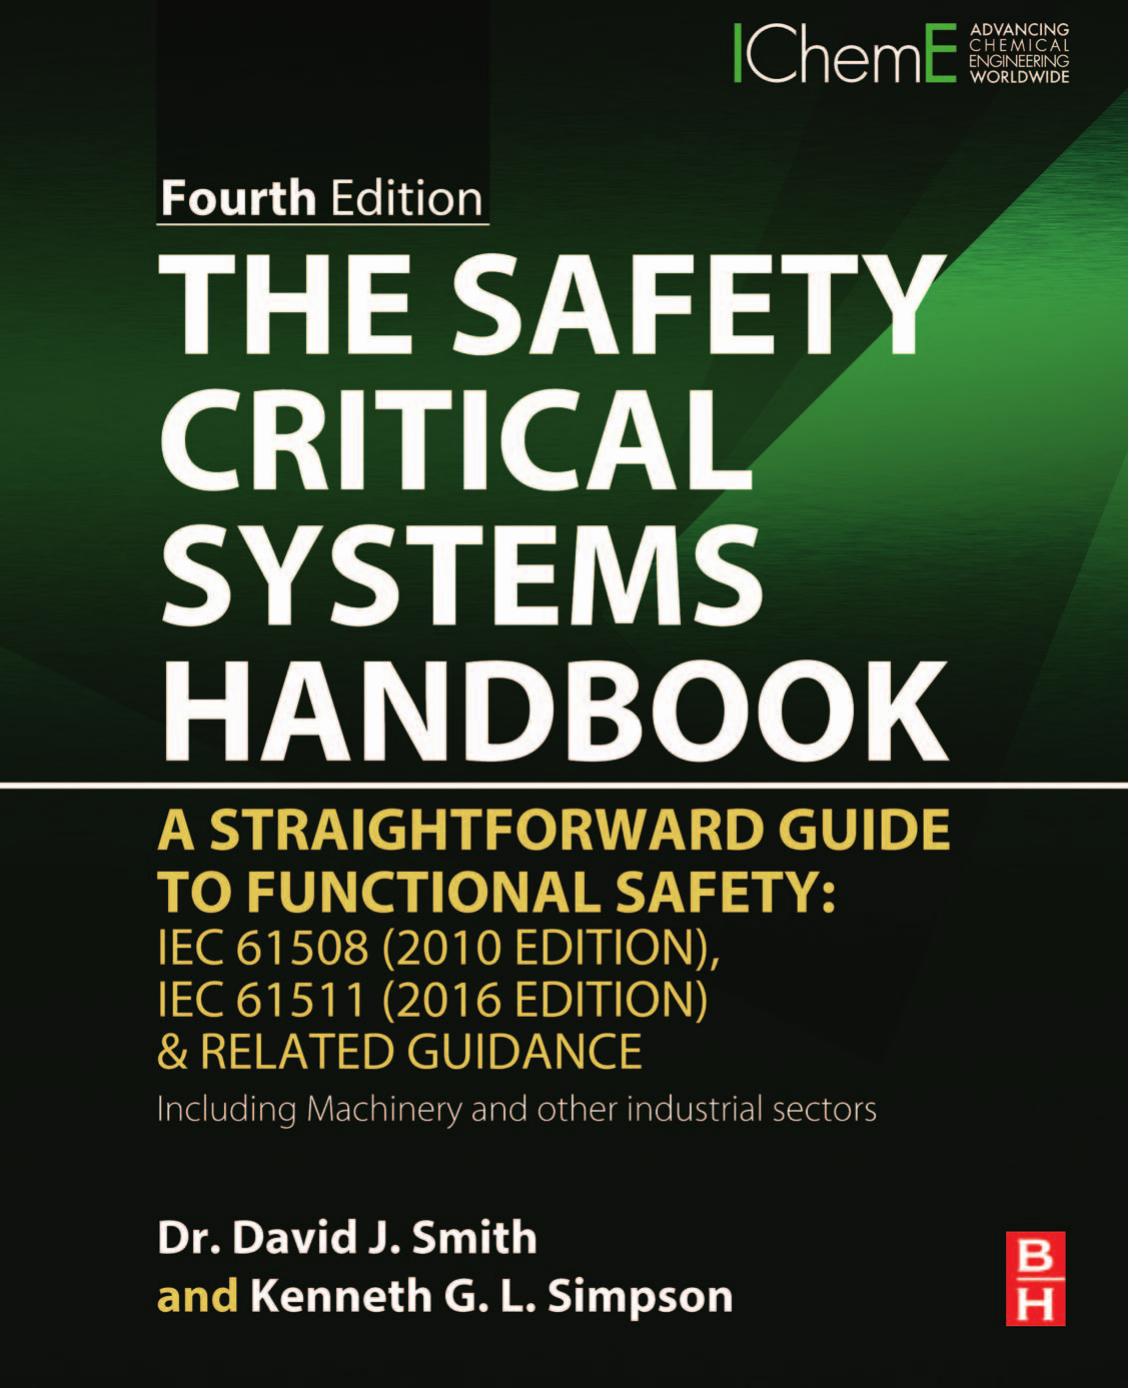 The Safety Critical Systems Handbook: A Straightforward Guide To Functional Safety: IEC 61508 (2010 Edition), IEC 61511 (2016 Edition) & Related Guidance